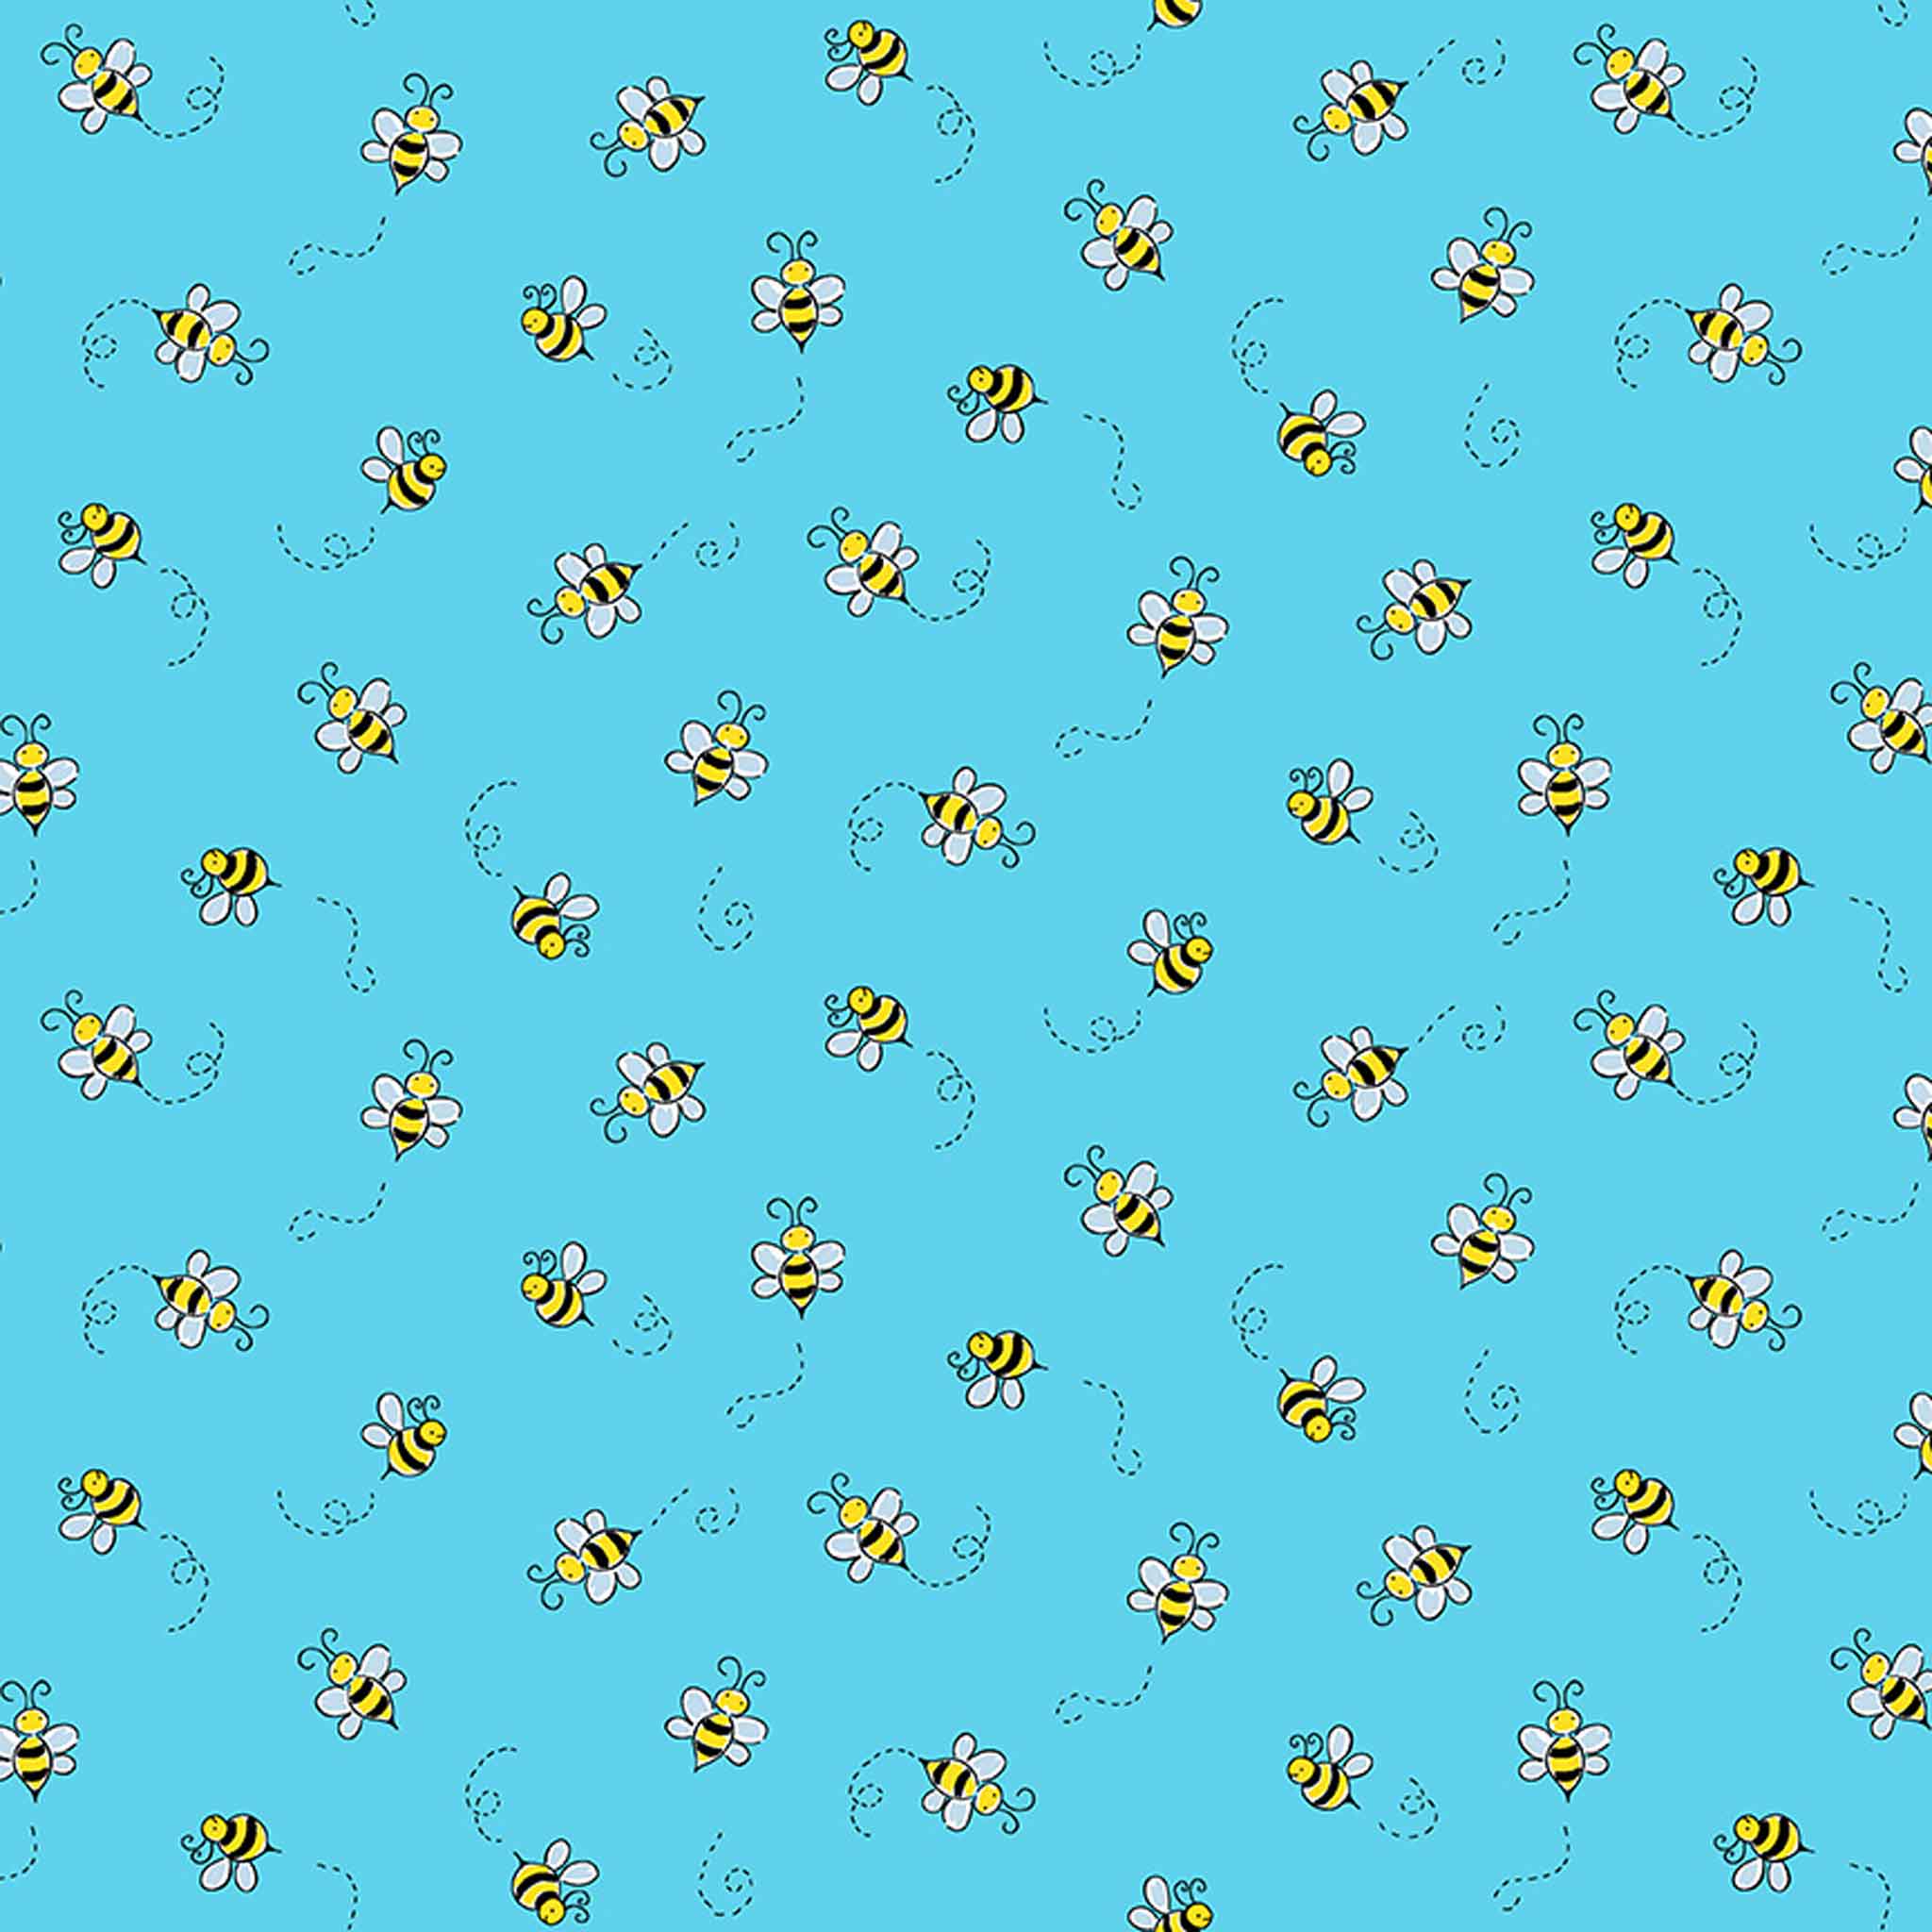 Turquoise Cotton Fabric Andover Fabrics 9715/T - Bumble Bee